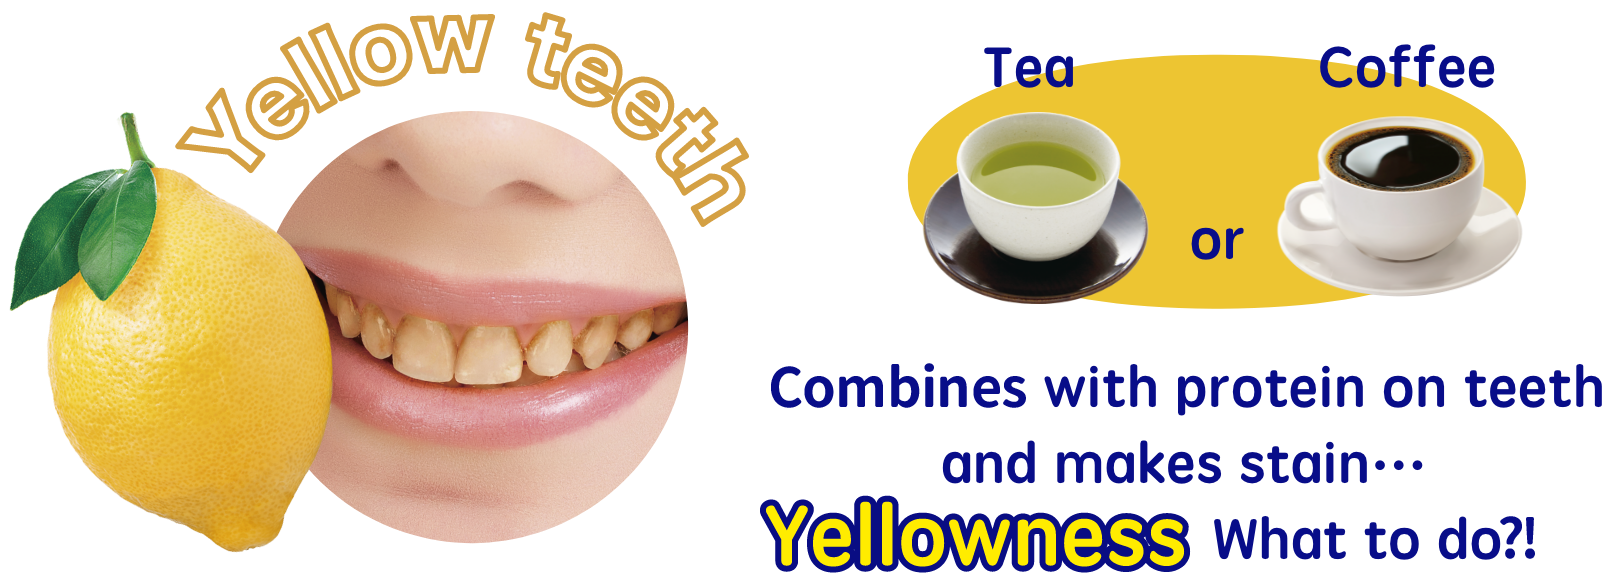 Combined with protein on teeth
        and makes stain... Yellowness  What to do!